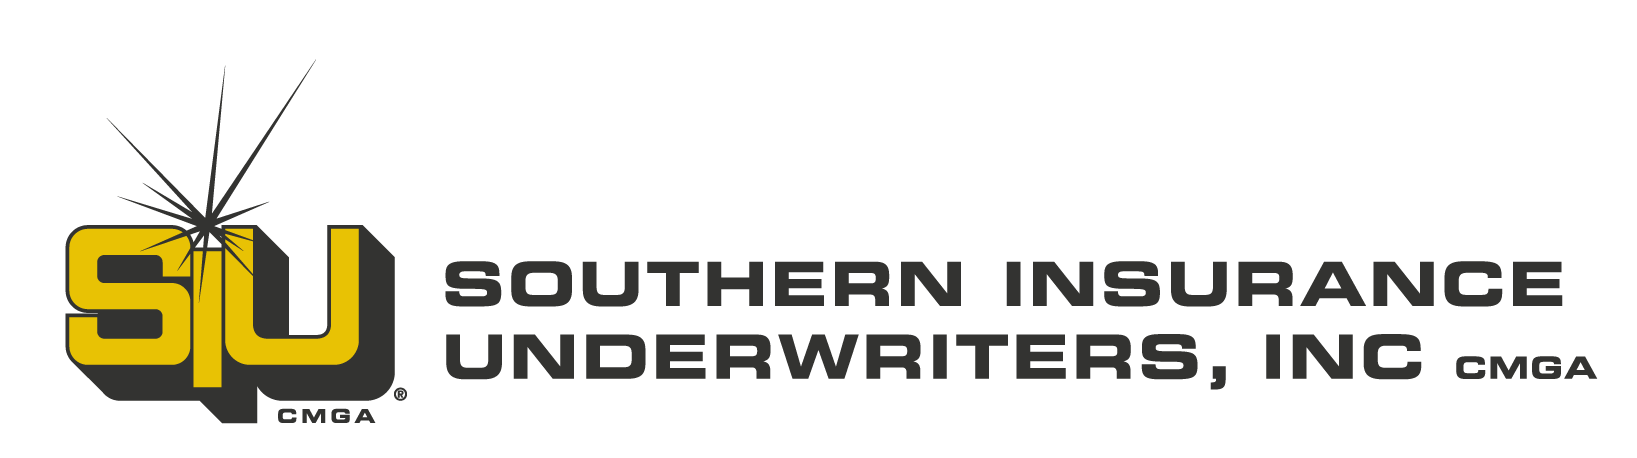 Southern Insurance Underwriters